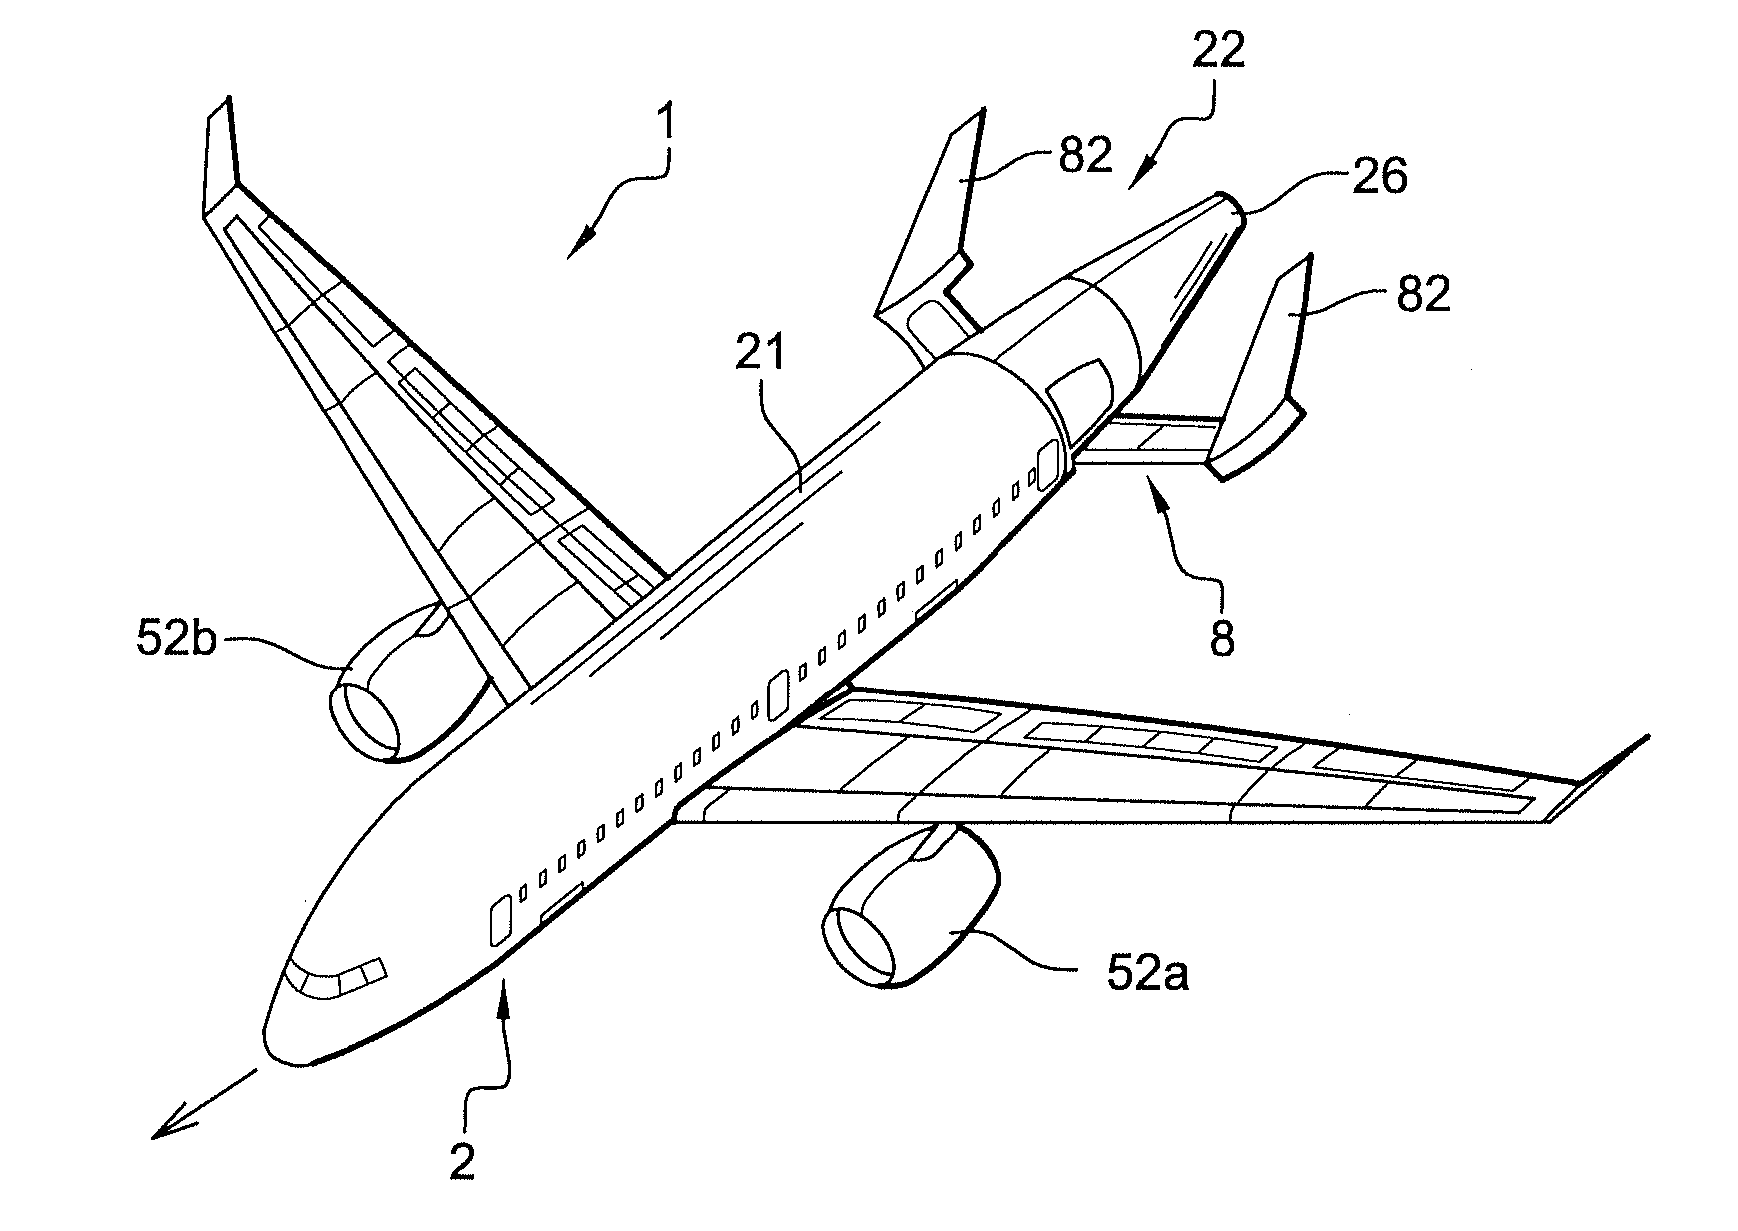 Beam mounted rear propulsion system for an aircraft and aircraft with such system